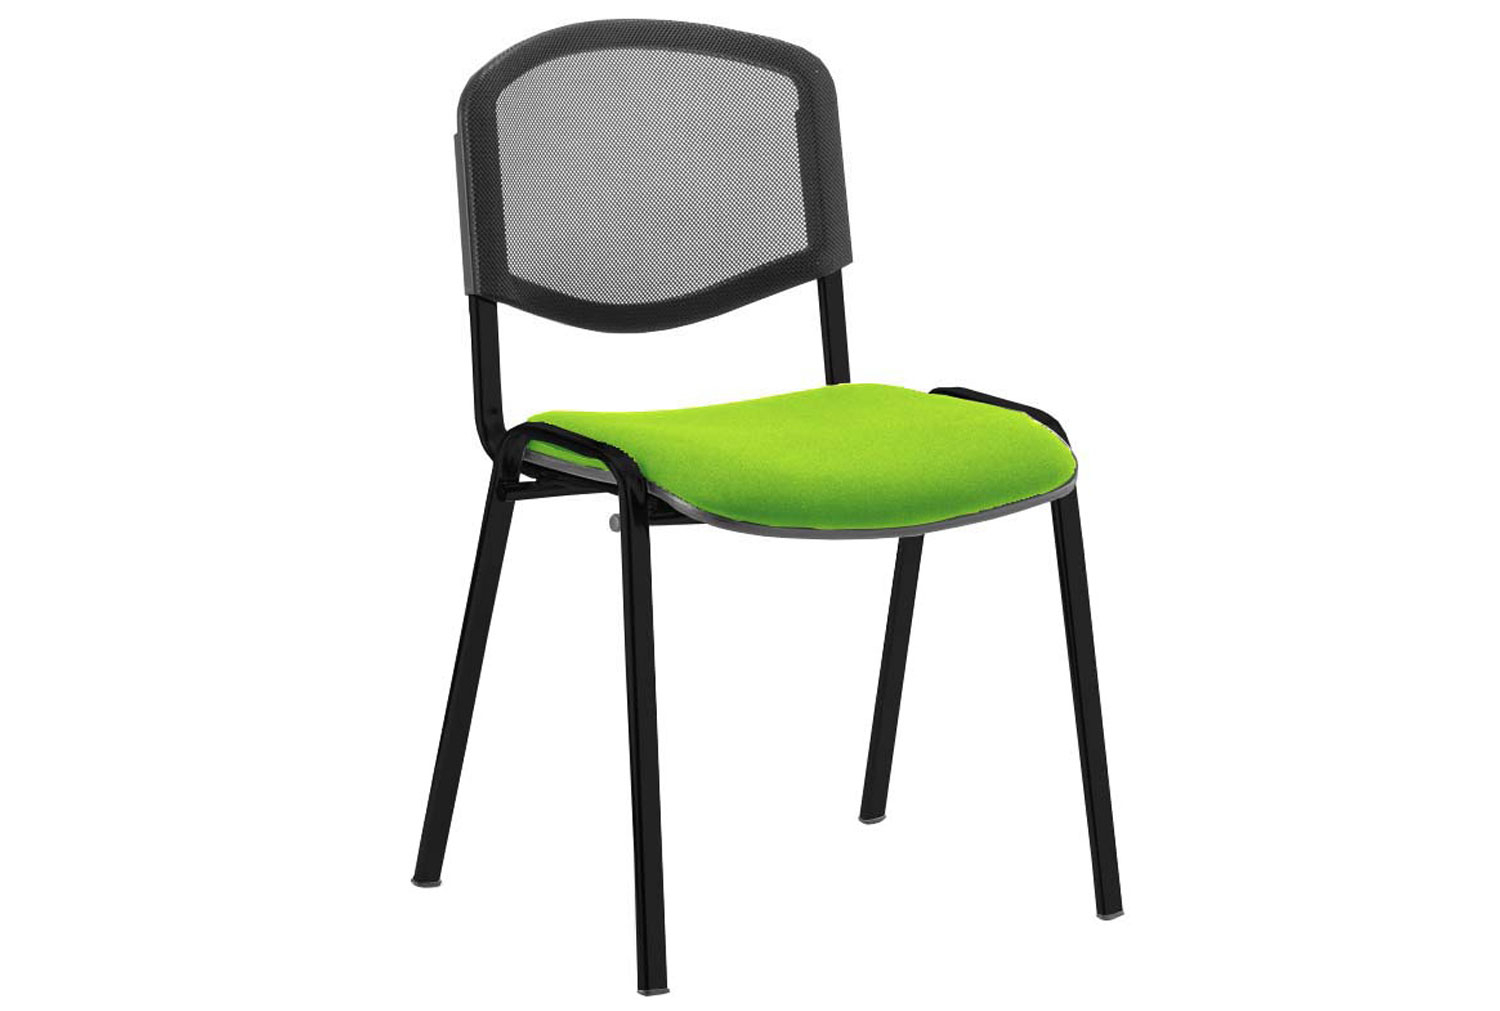 Qty 4 - ISO Black Frame Mesh Back Stacking Conference Office Chair (Myrrh Green)